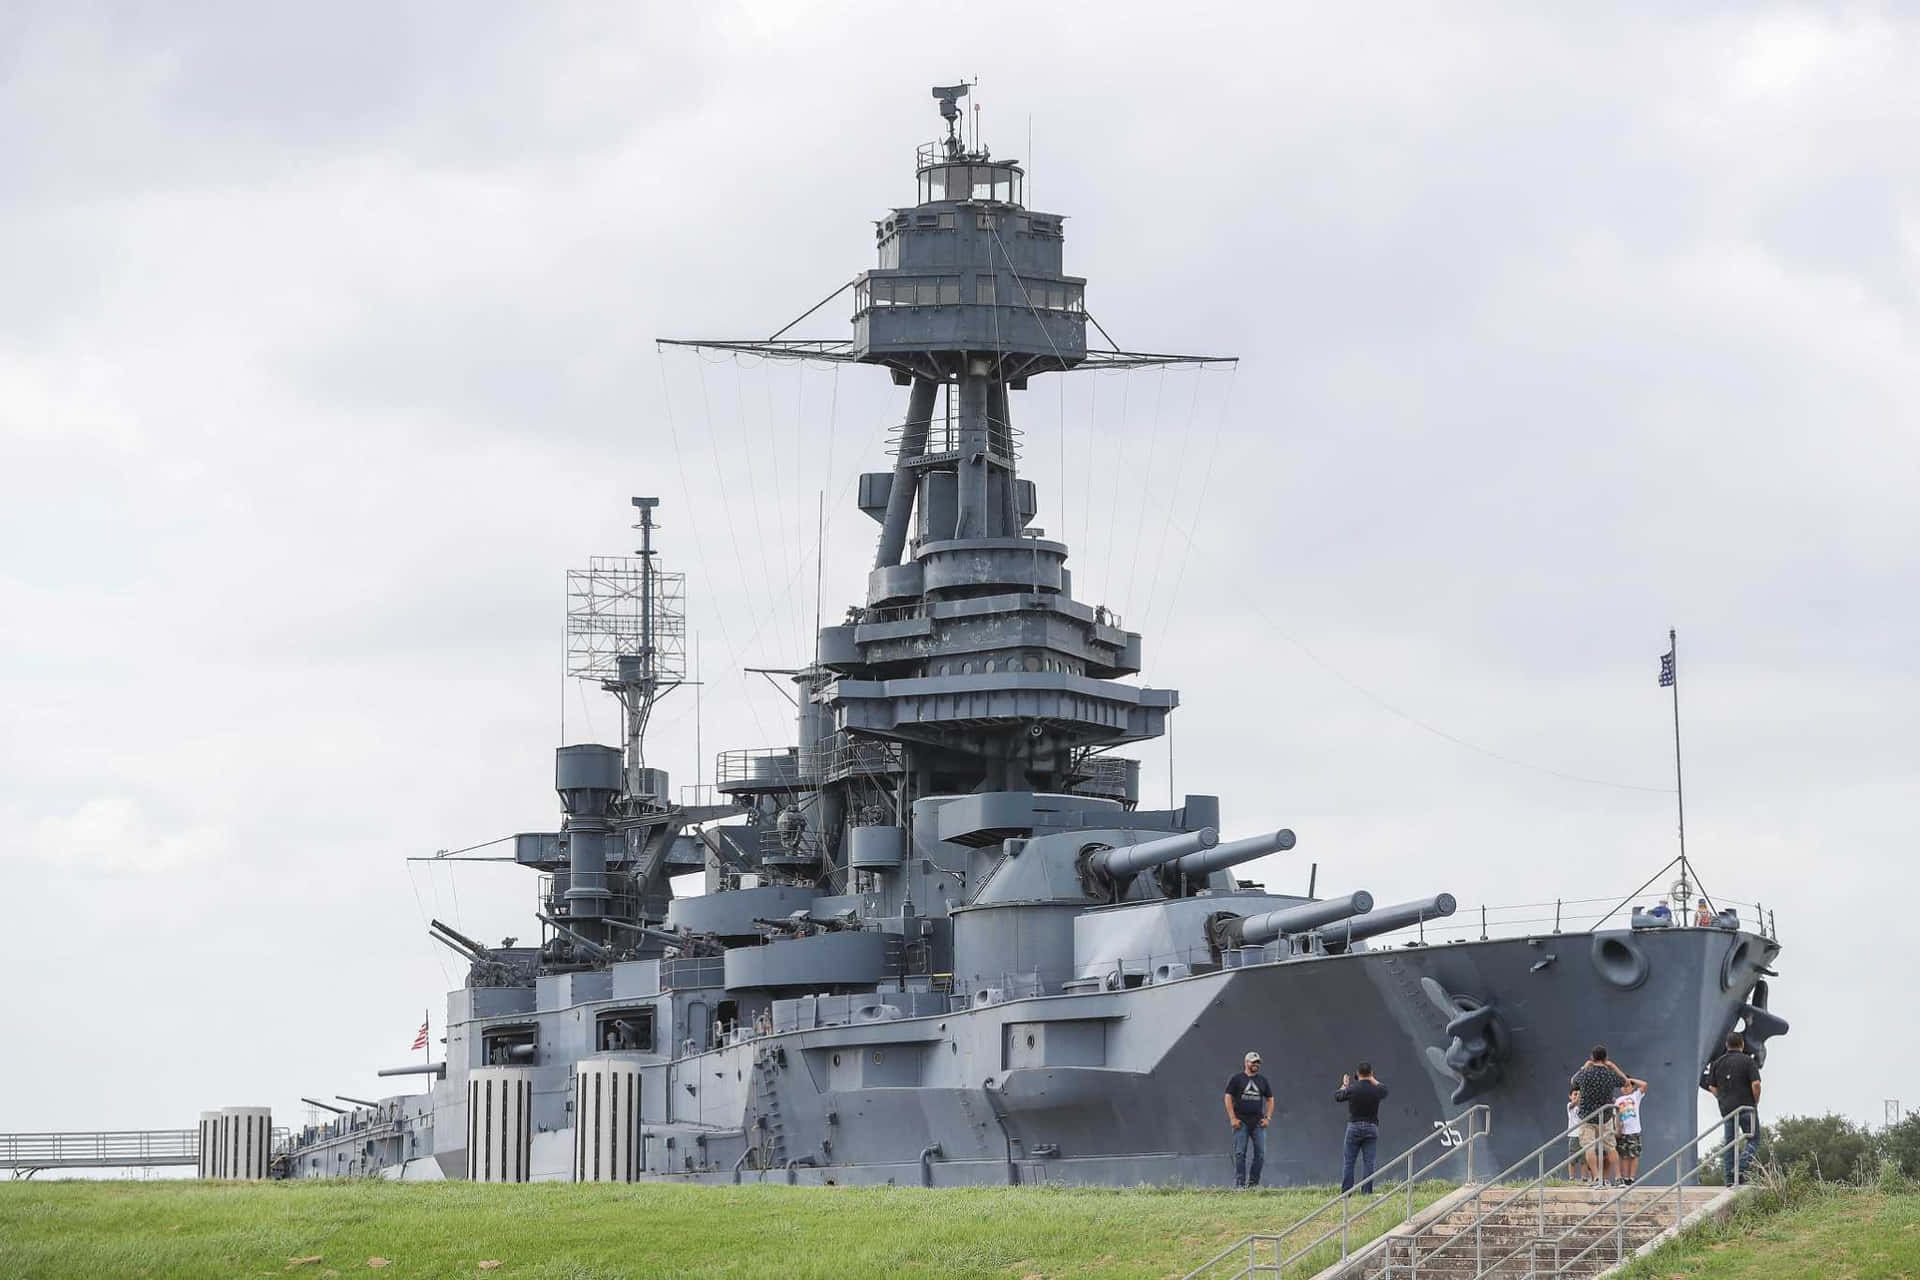 a battleship is on display in a grassy area